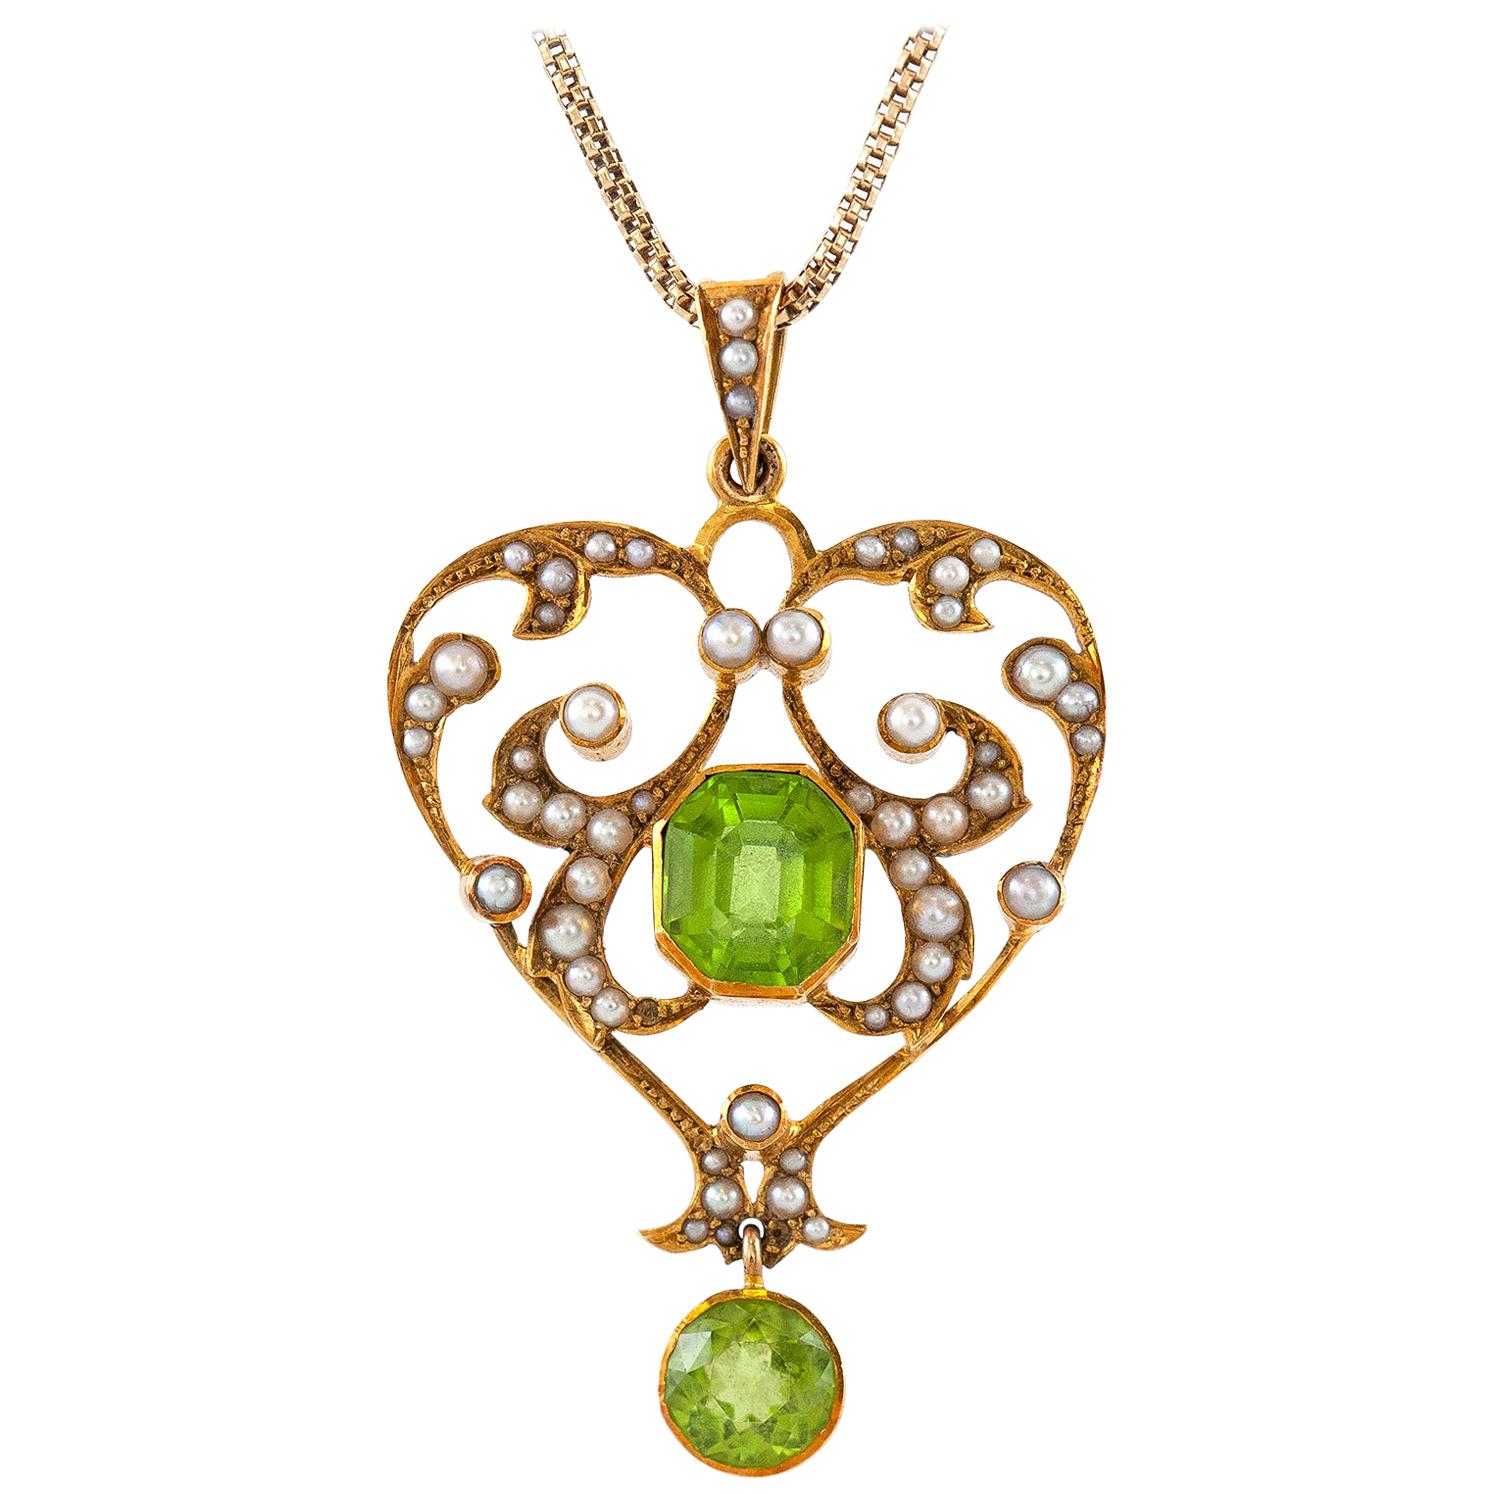 Heart-Shaped Pendant-Necklace with Pearls and Tourmalines For Sale